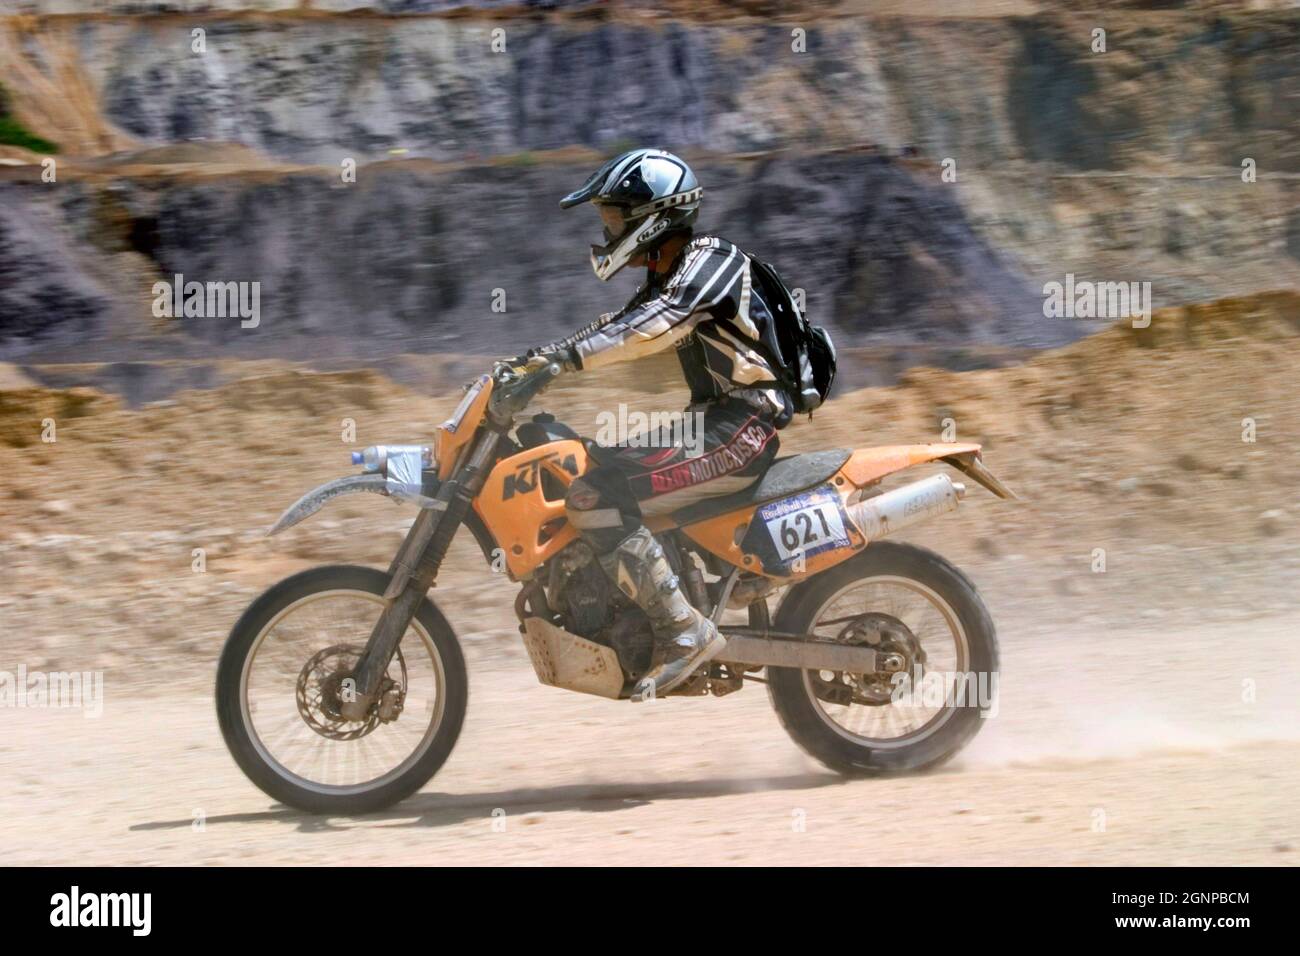 Arquivo de Motocross - Page 2 of 2 - Motorcycle Sports